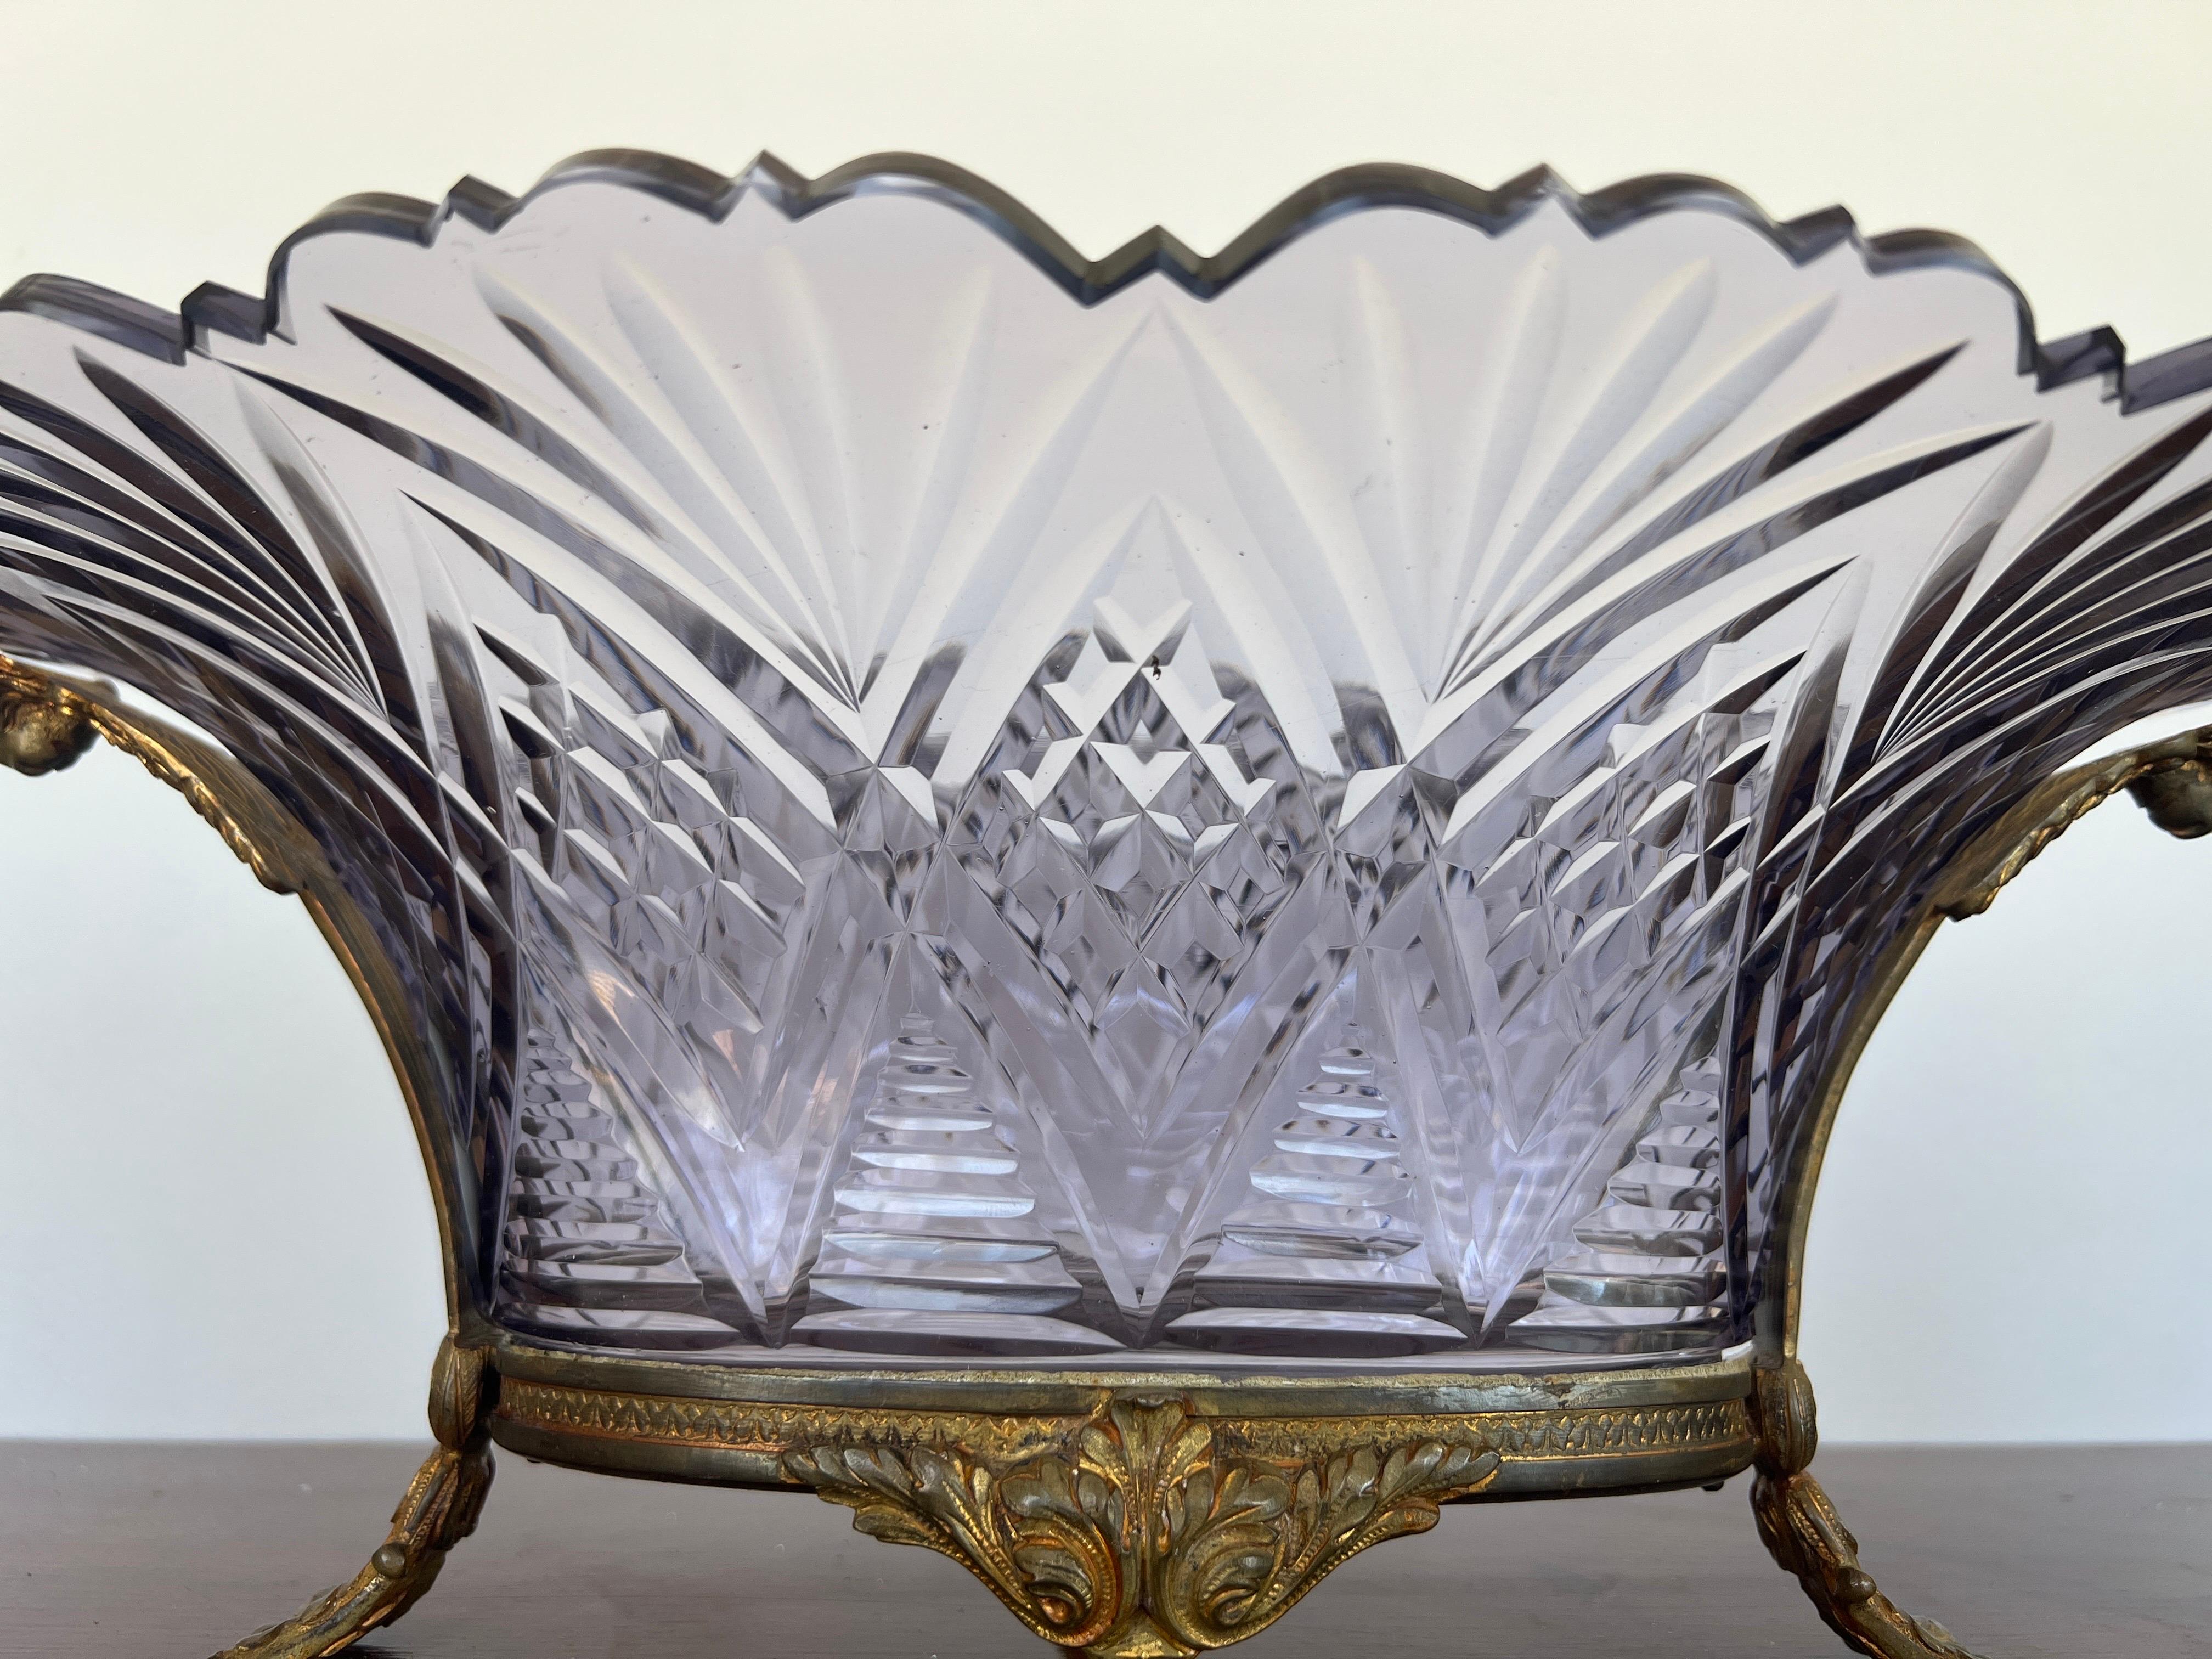 French, likely Baccarat late 19th century. A finely cut amethyst glass centerpiece bowl with ripped cut rim and diamond etched surround. The main body is set inside a bronze base with beautiful ram head supports, foliate rim and supported by four